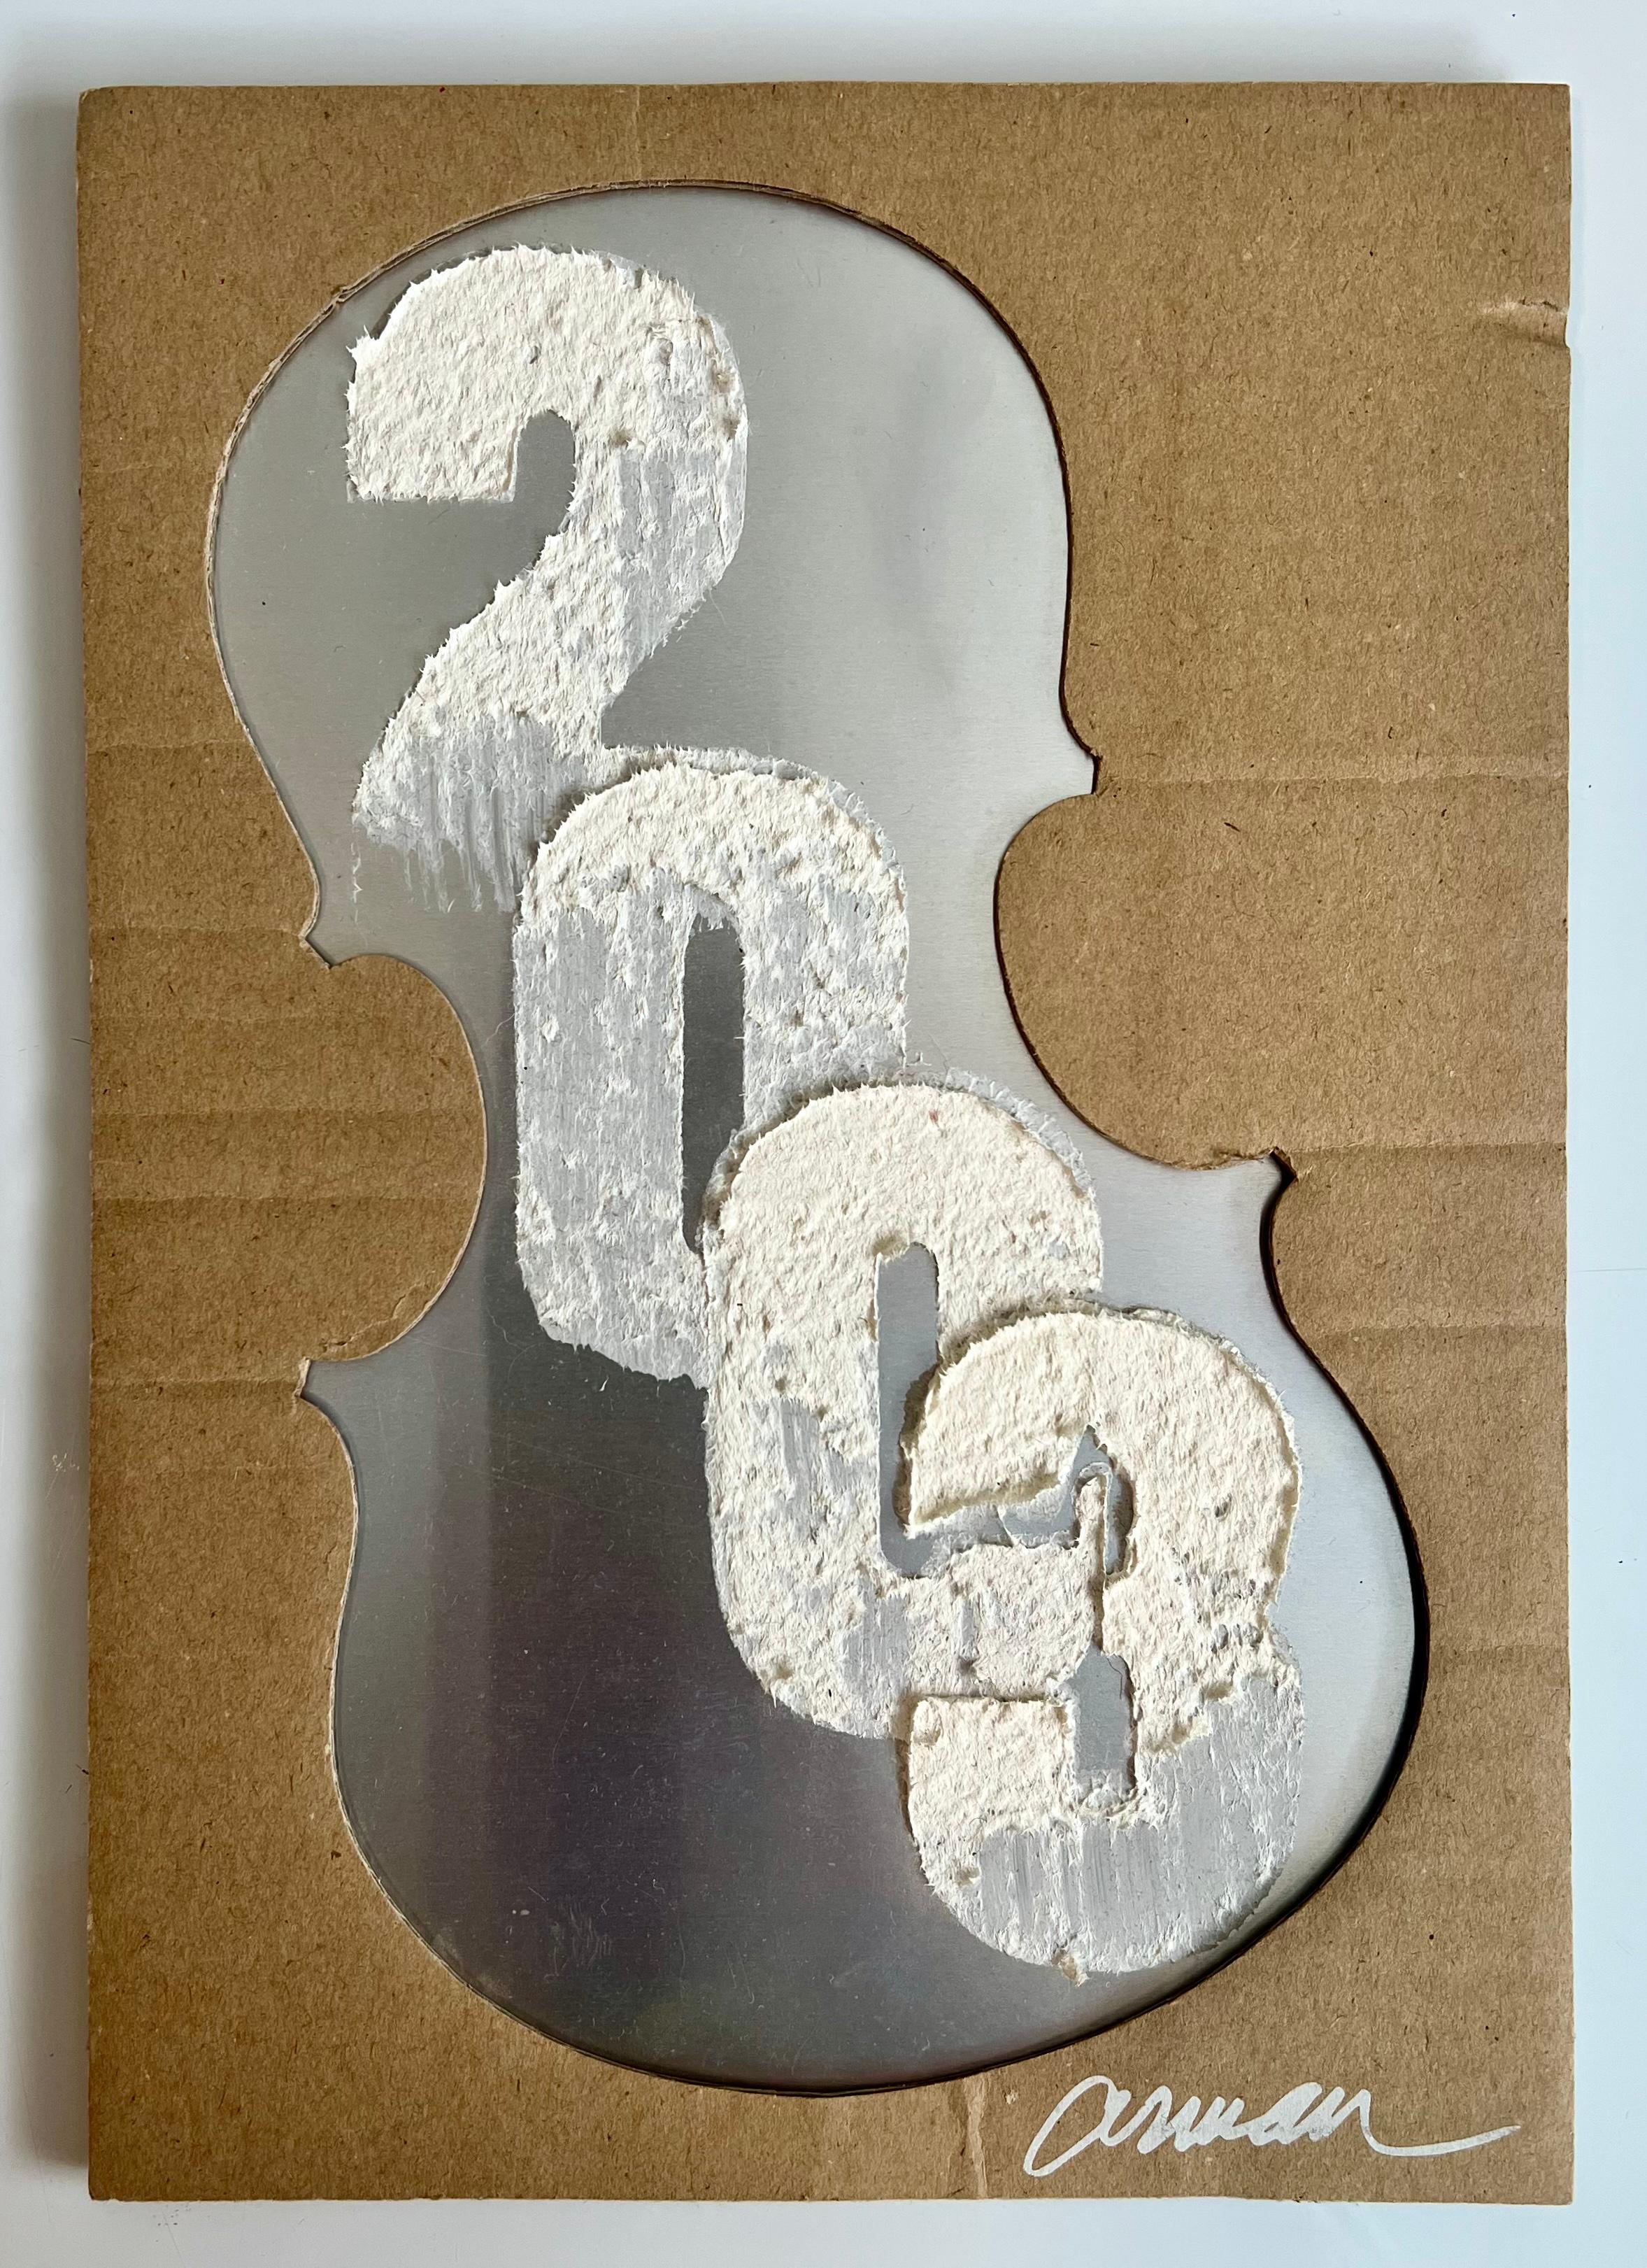 Arman, French/American (1928-2005)
2003
mixed media paint on found metal in a cardboard cut out of a violin
inscribed to interior
signed lower right and signed to the interior 'Arman and Corine'
11 3/4 x 8 1/4 inches
Provenance: Rosa and Aaron Esman